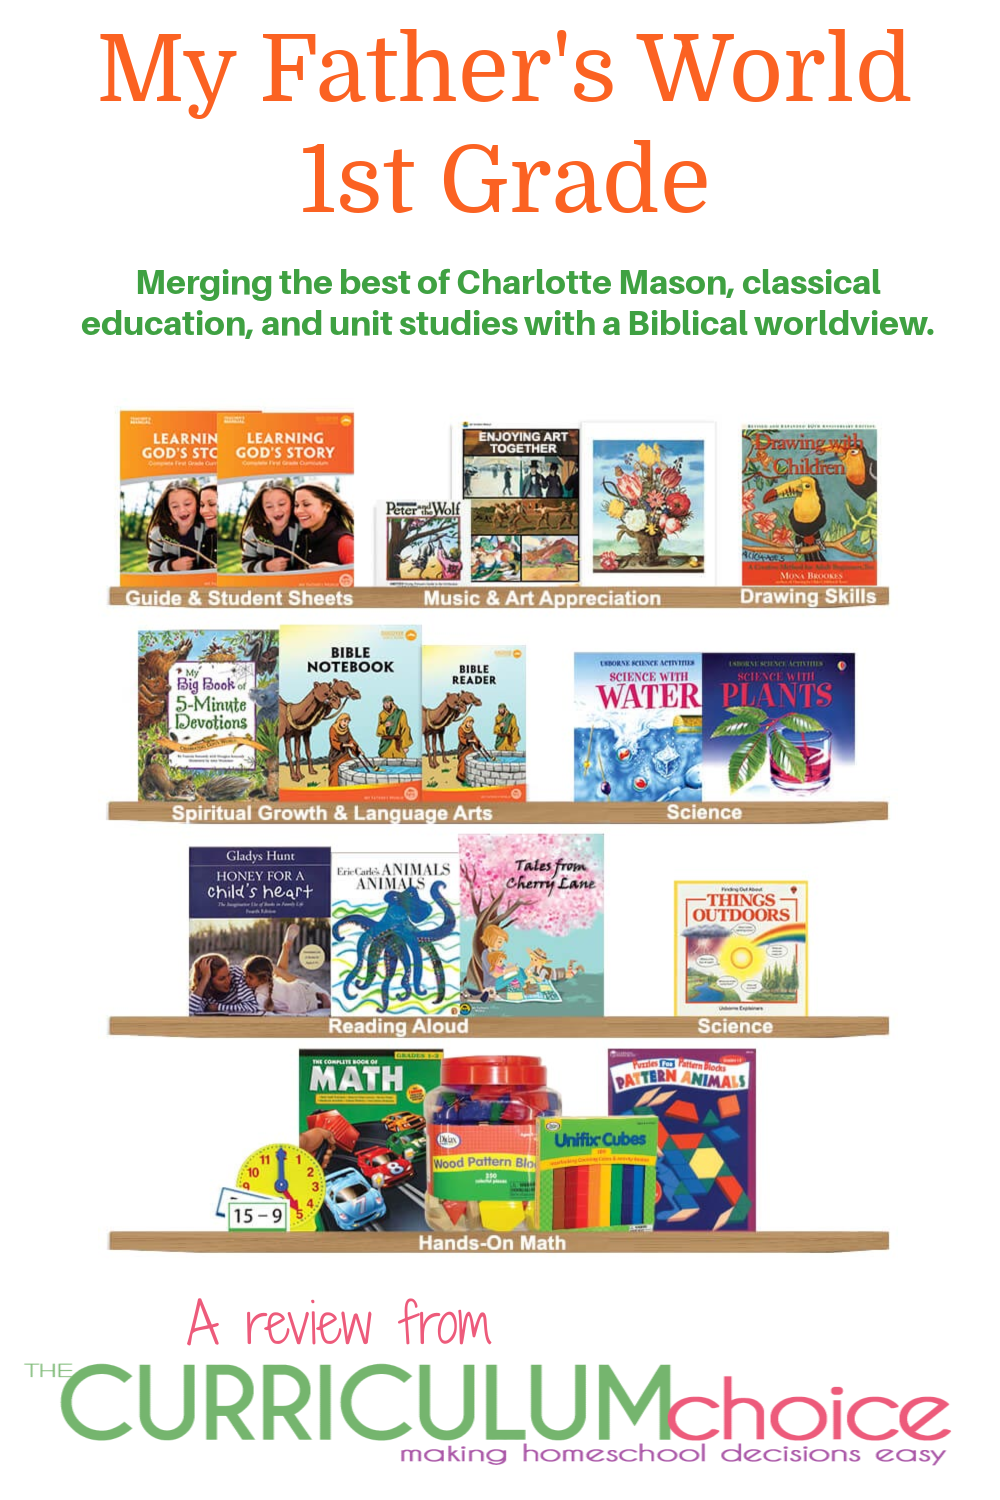 My Father's World 1st Grade Curriculum merges the best of Charlotte Mason, classical education, and unit studies with a Biblical worldview. A review from The Curriculum Choice.